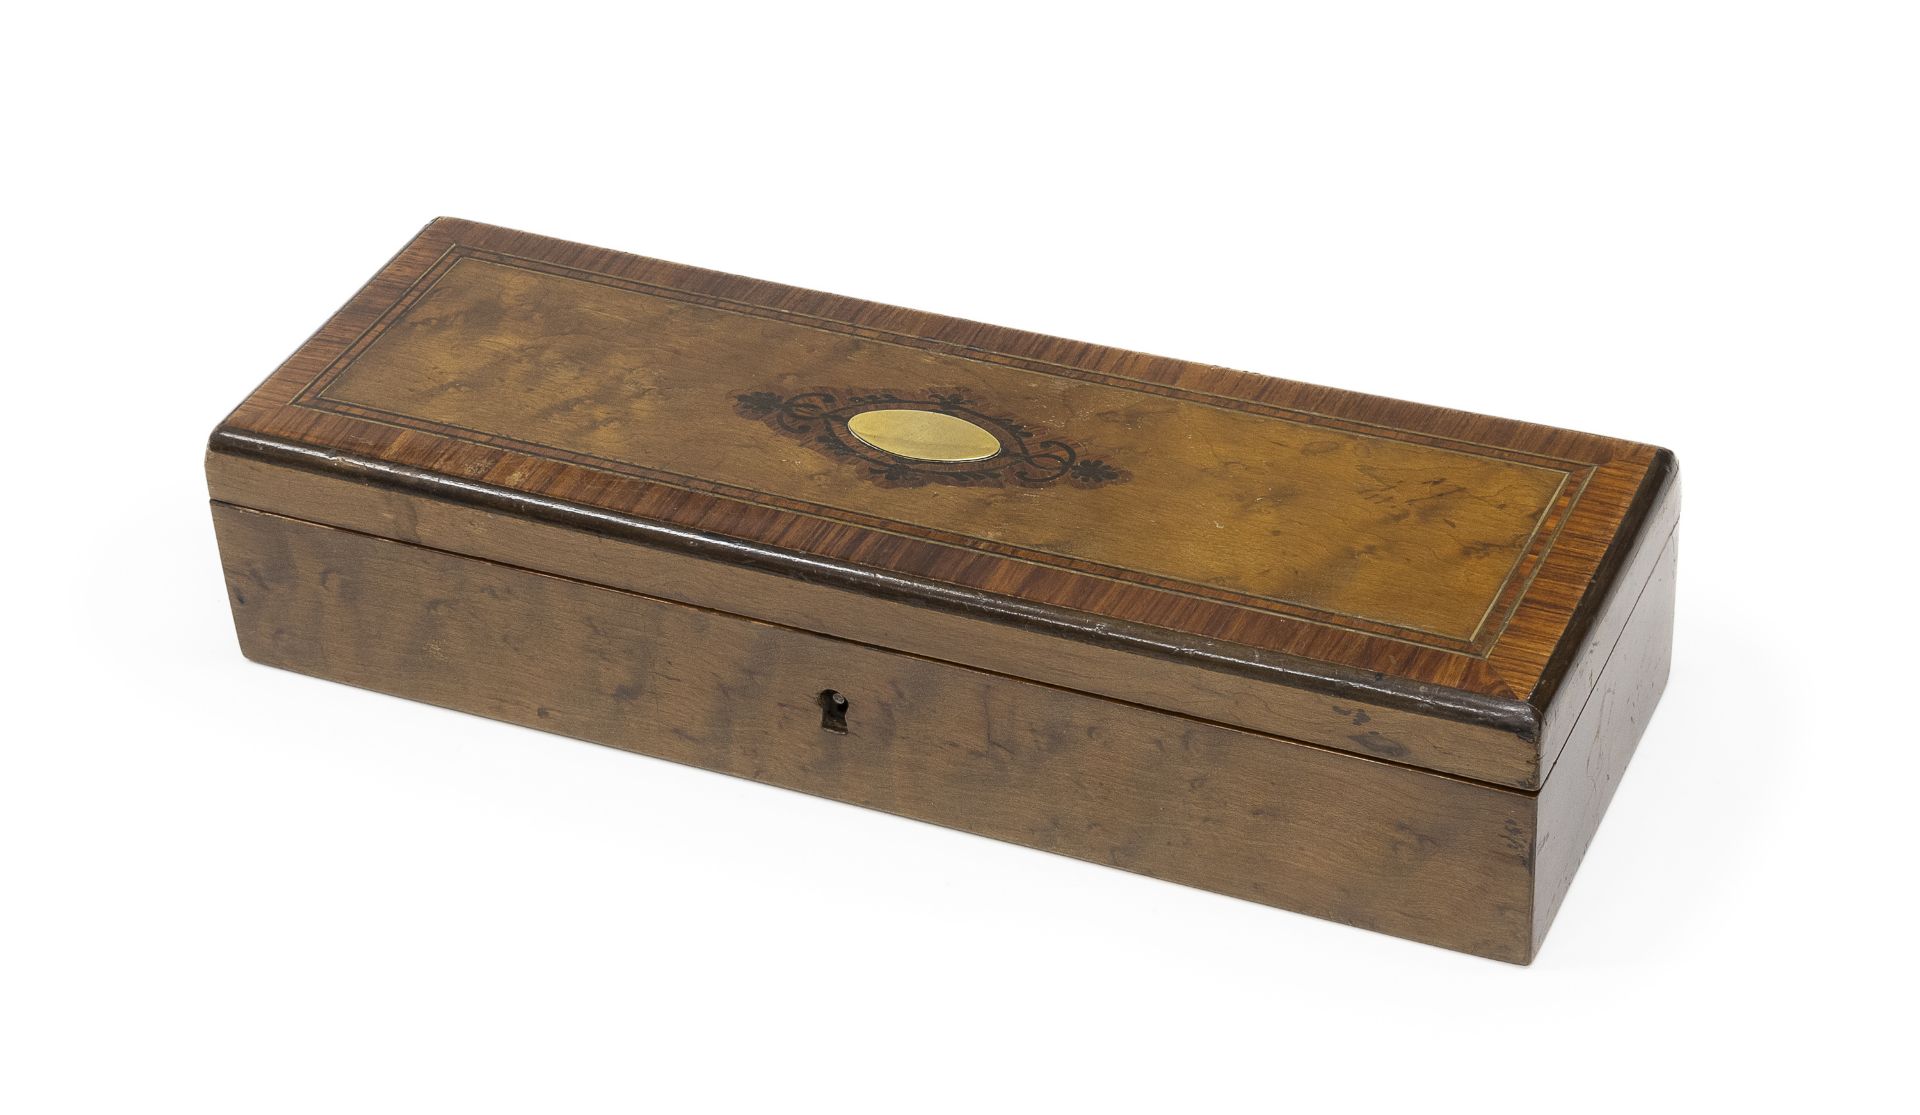 SEWING BOX LATE 19TH CENTURY